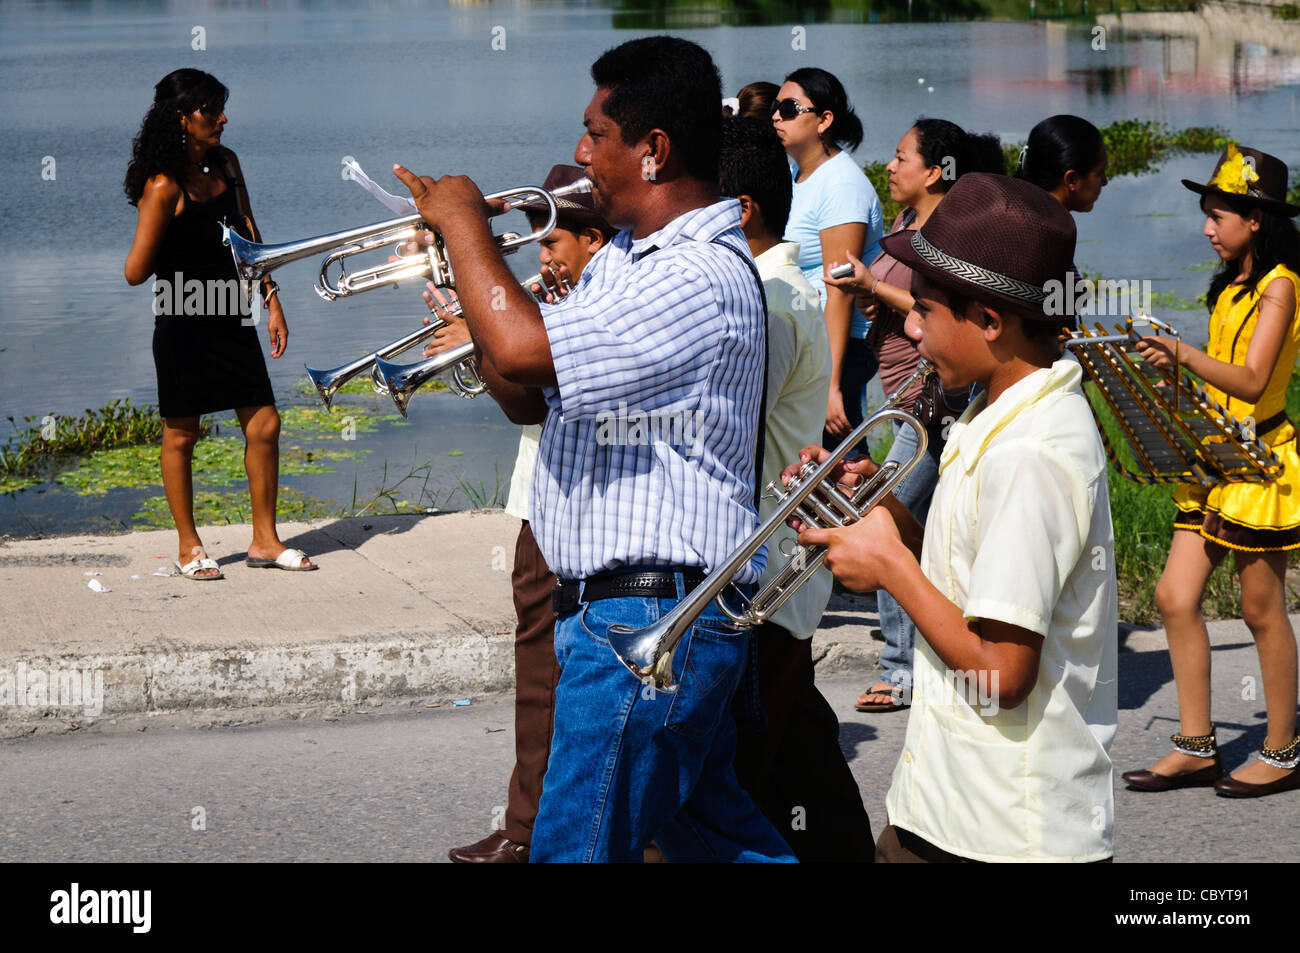 FLORES, Guatemala - A band plays as part of the celebrations for Guatemalan Independence Day on September 15, 2011. Groups of school students parade in a procession through the streets of Flores, starting in the Parque Central, walking through the town, and crossing the causeway into Santa Elena. Stock Photo